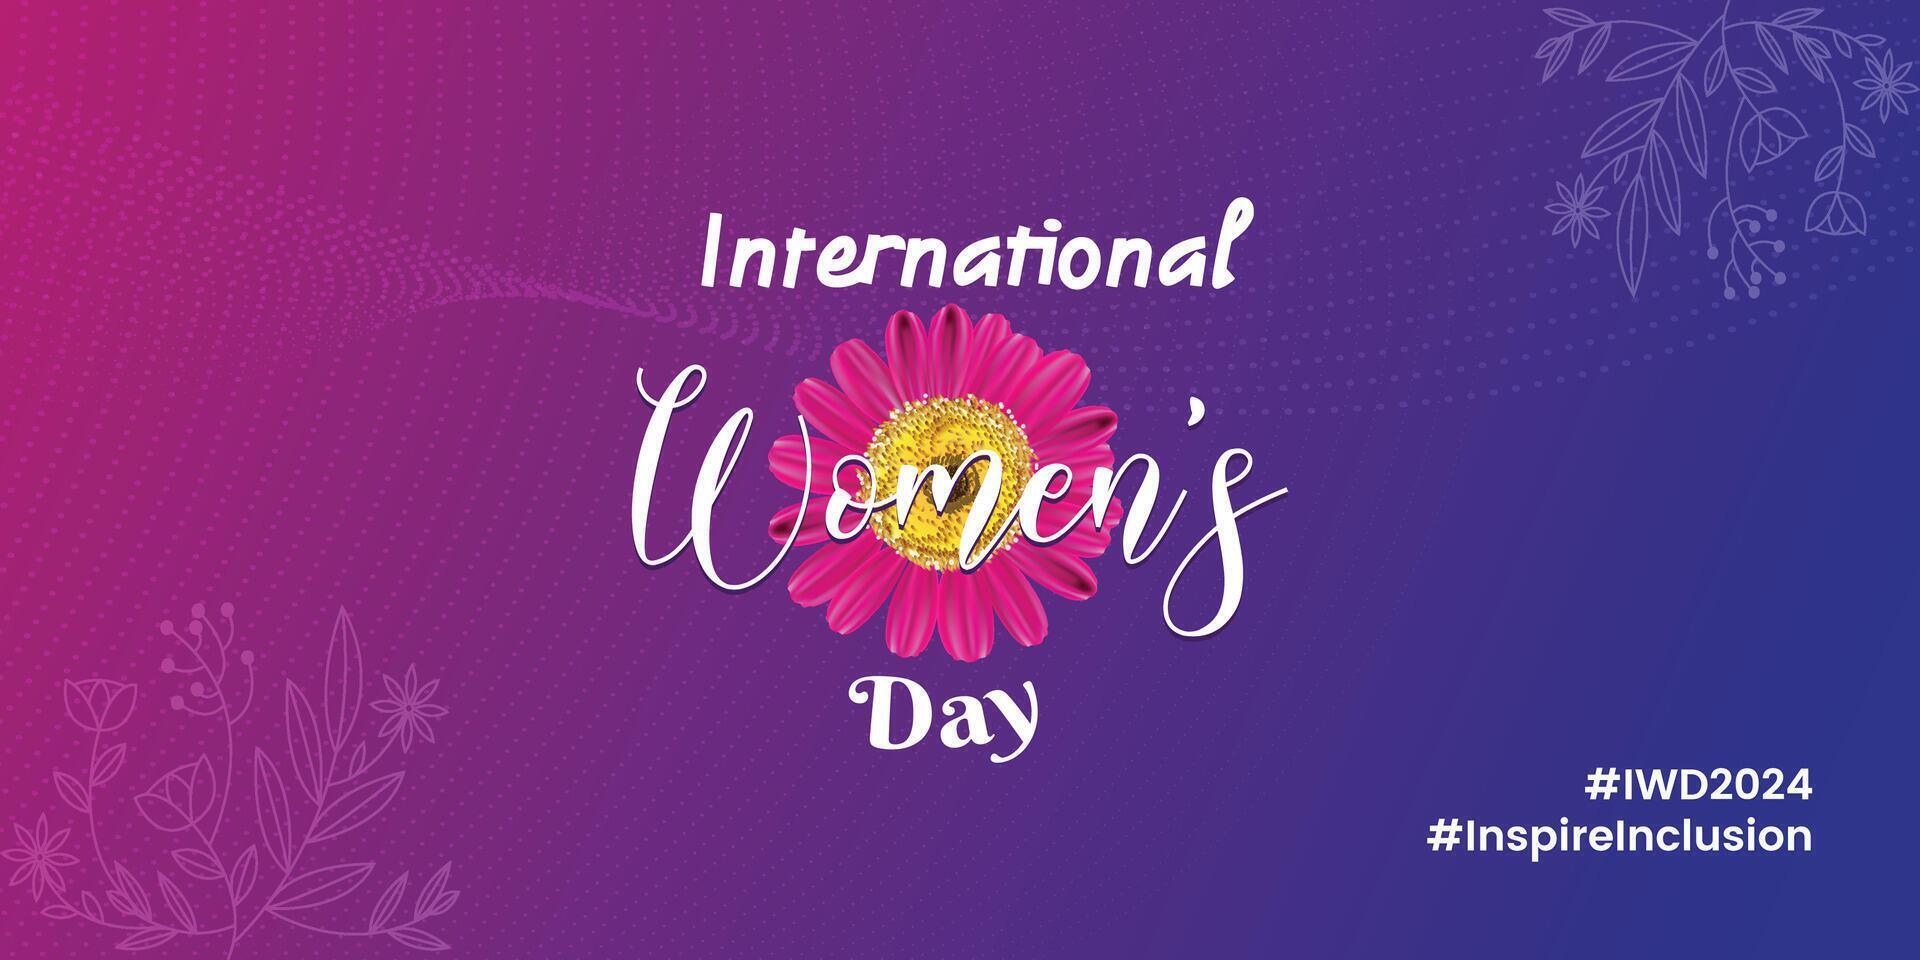 International Womens Day concept poster. 2024 Womens Day campaign theme Inspire Inclusion, Females for feminism, independence, sisterhood, empowerment, activism for women rights vector